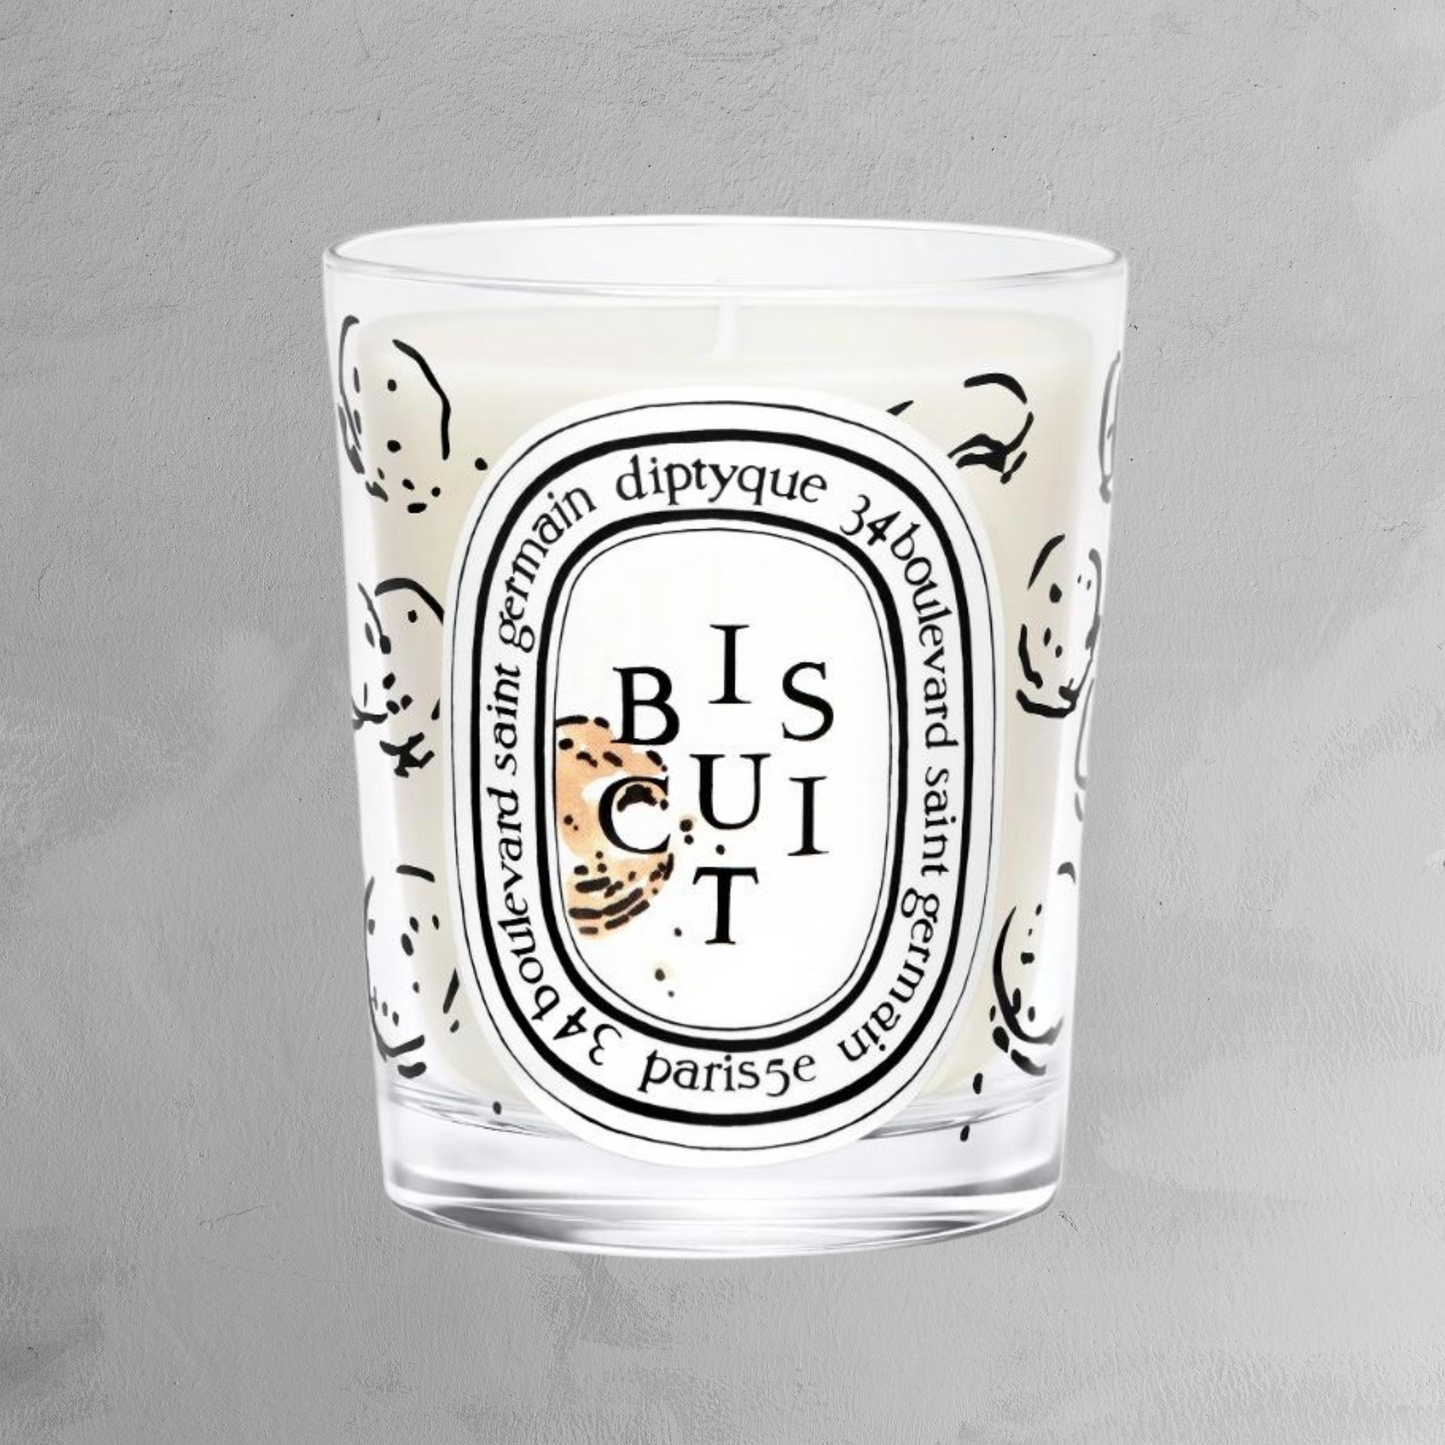 Diptyque - Classic Candle - Biscuit (Cookie)